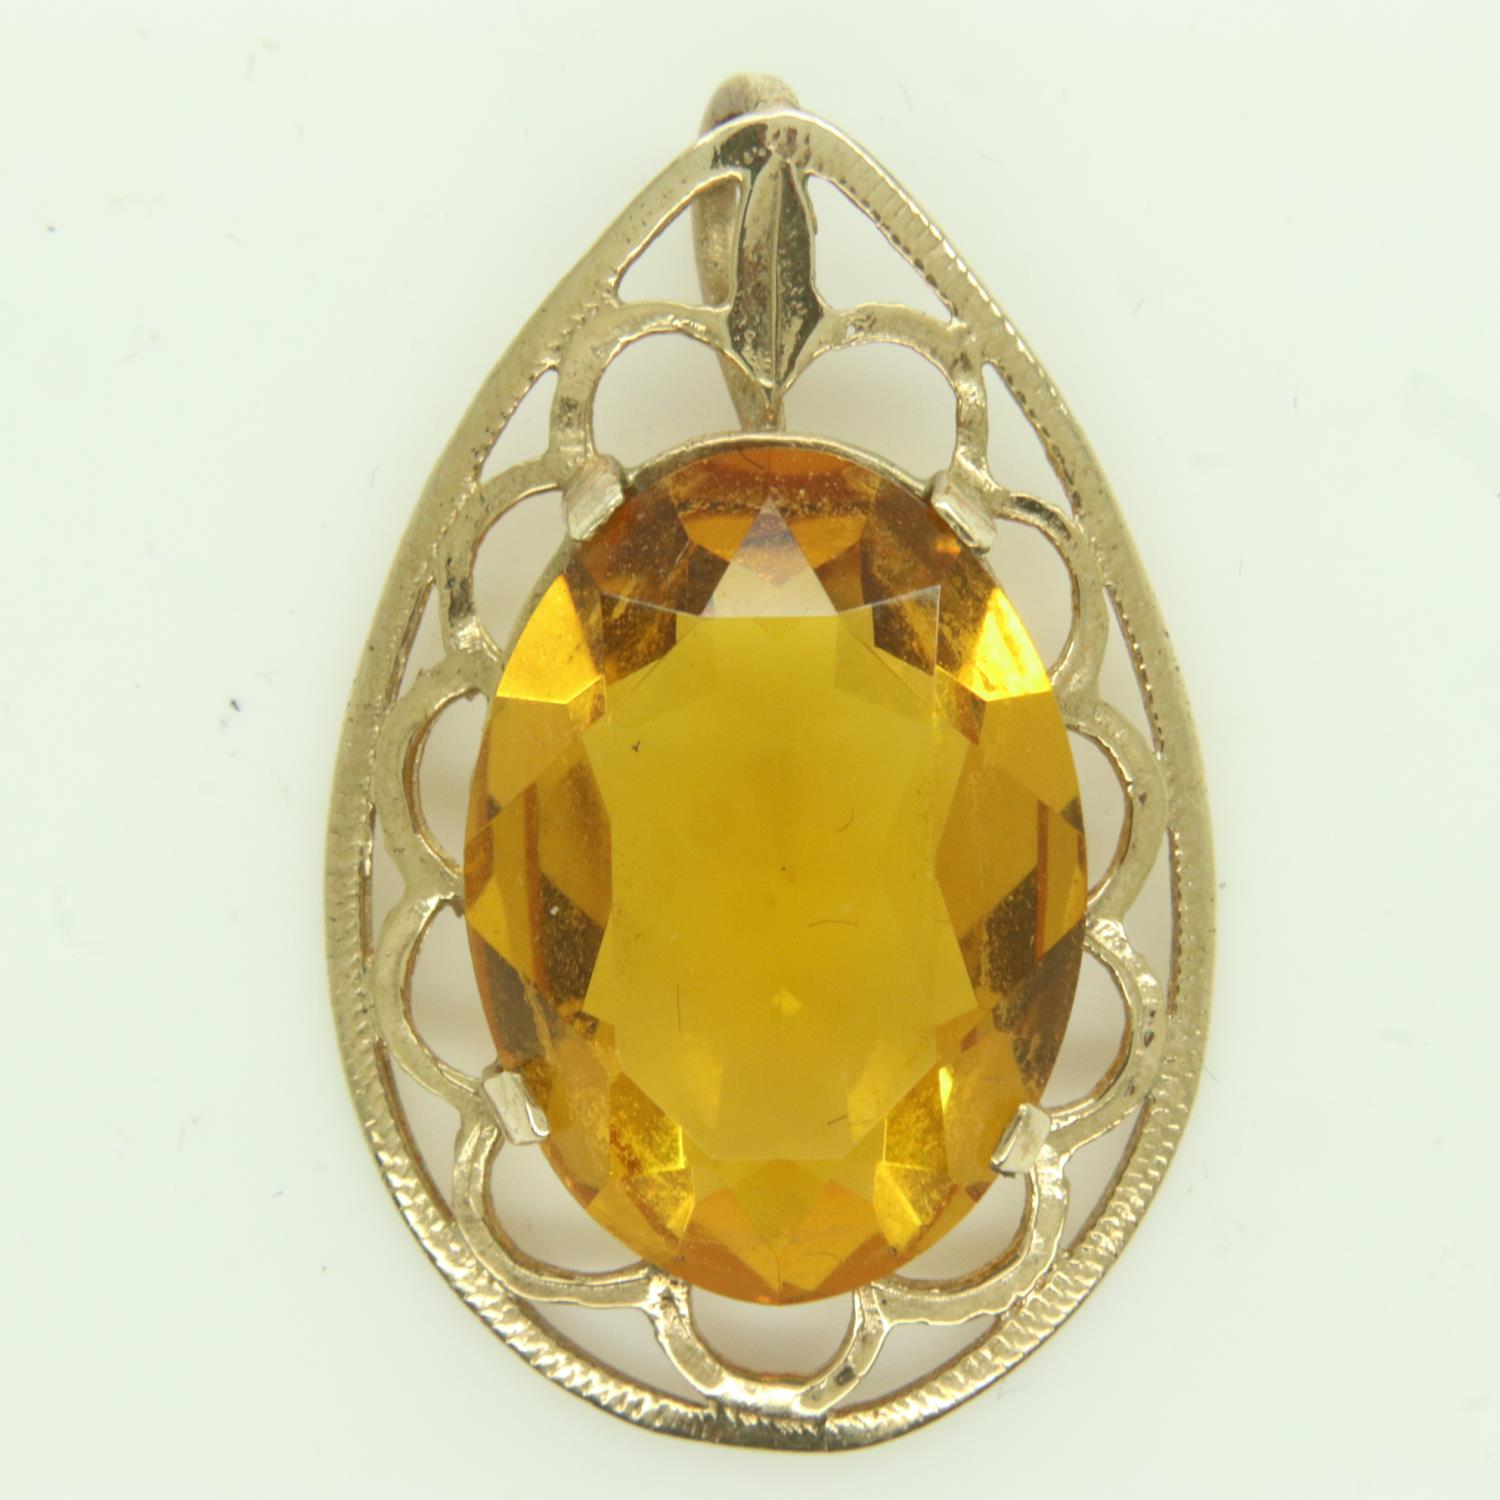 **** WITHDRAWN ****9ct gold teardrop pendant set with a large citrine, H: 30 mm, 3.1g. UK P&P